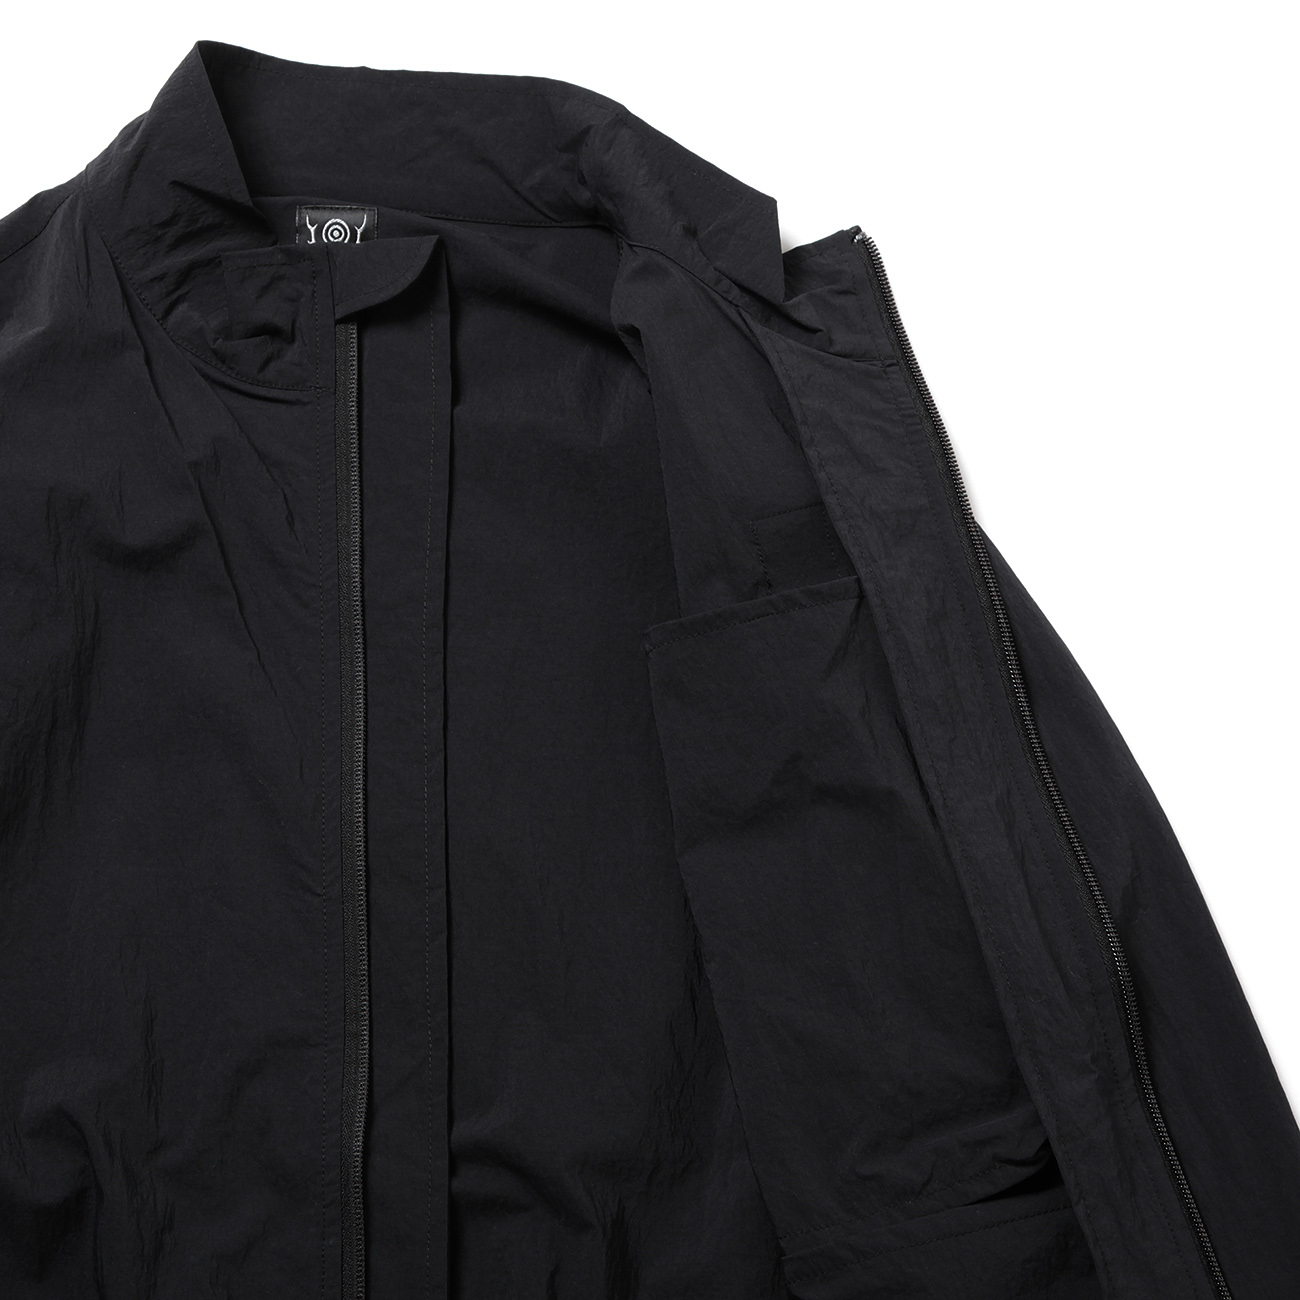 South2 West8 / サウスツーウエストエイト | Packable Jacket